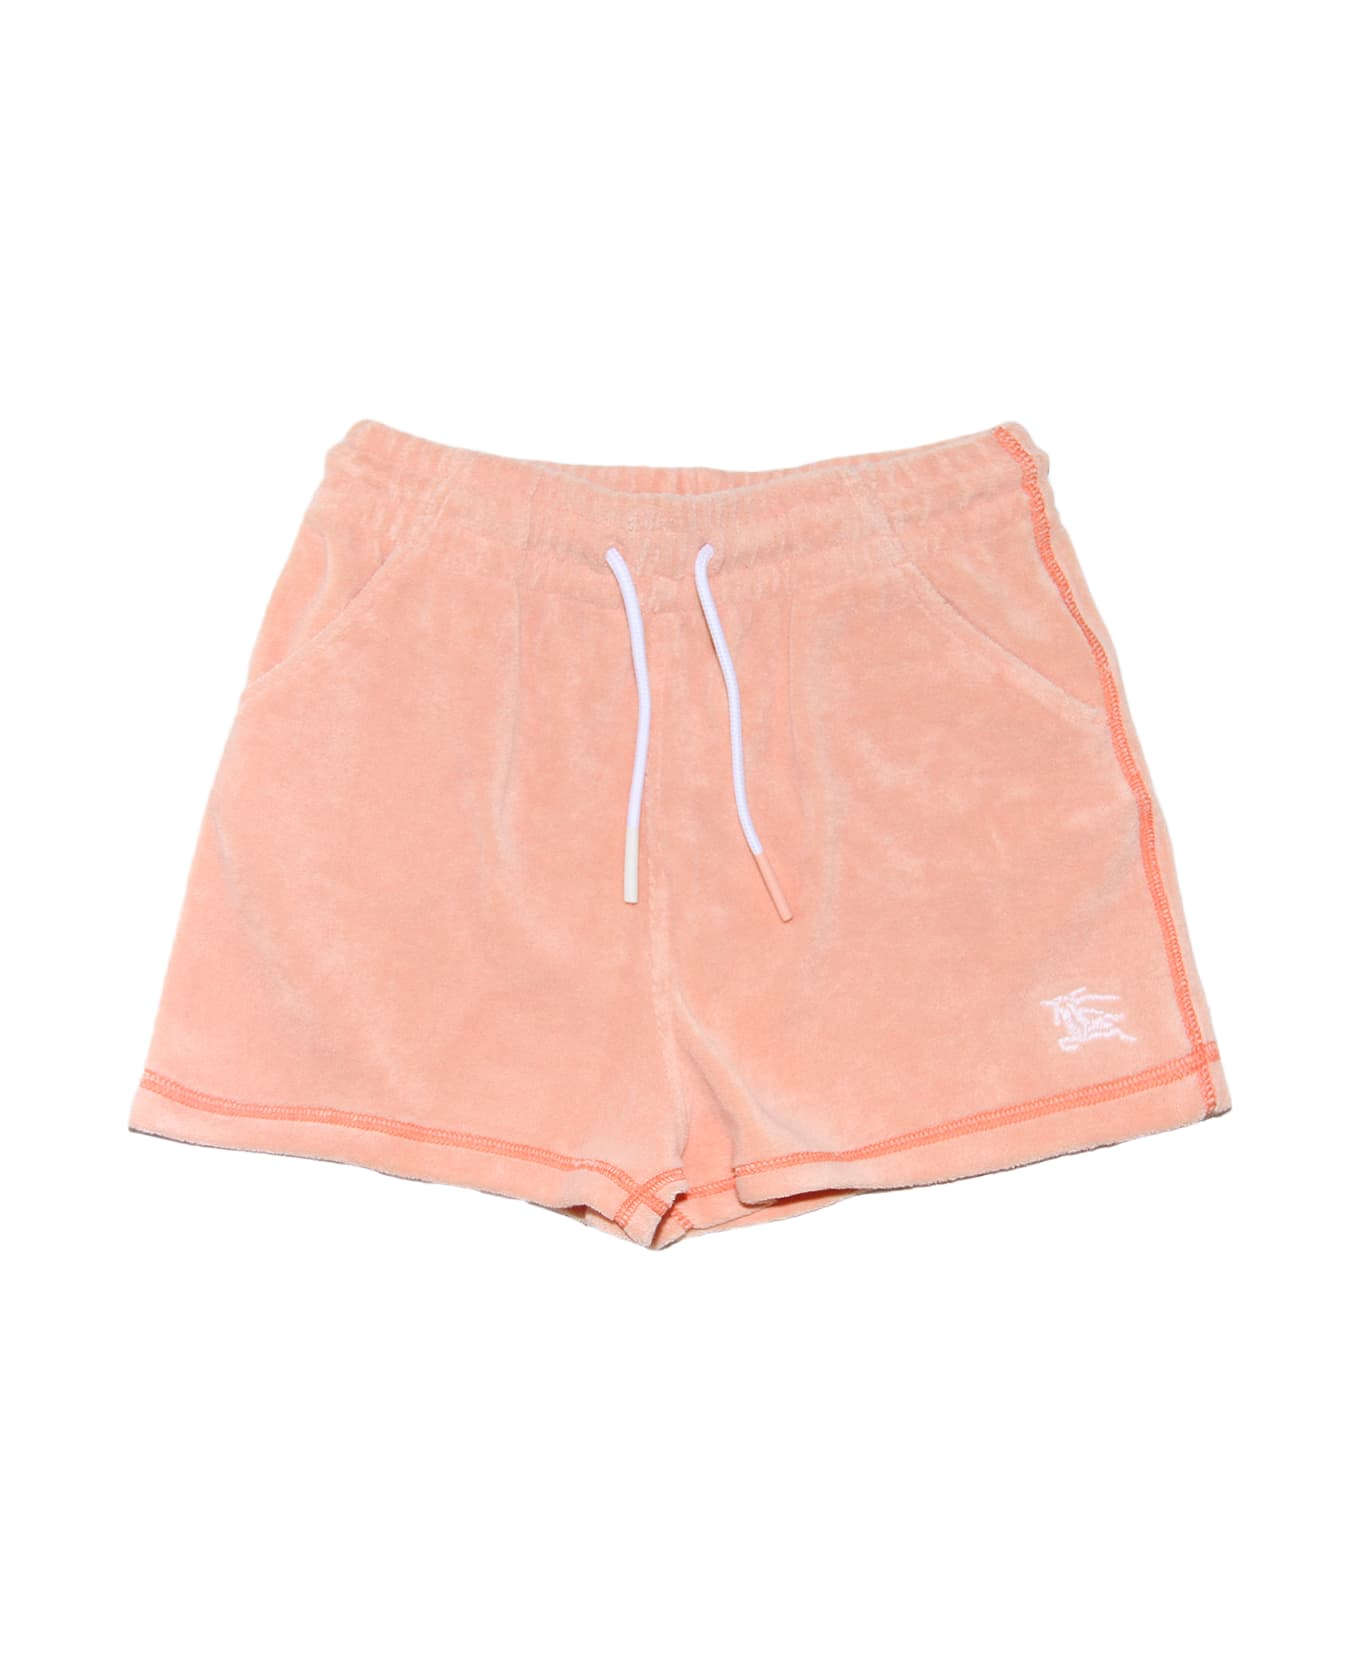 Burberry Dusky Coral Cotton Blend Shorts - DUSKY CORAL ボトムス